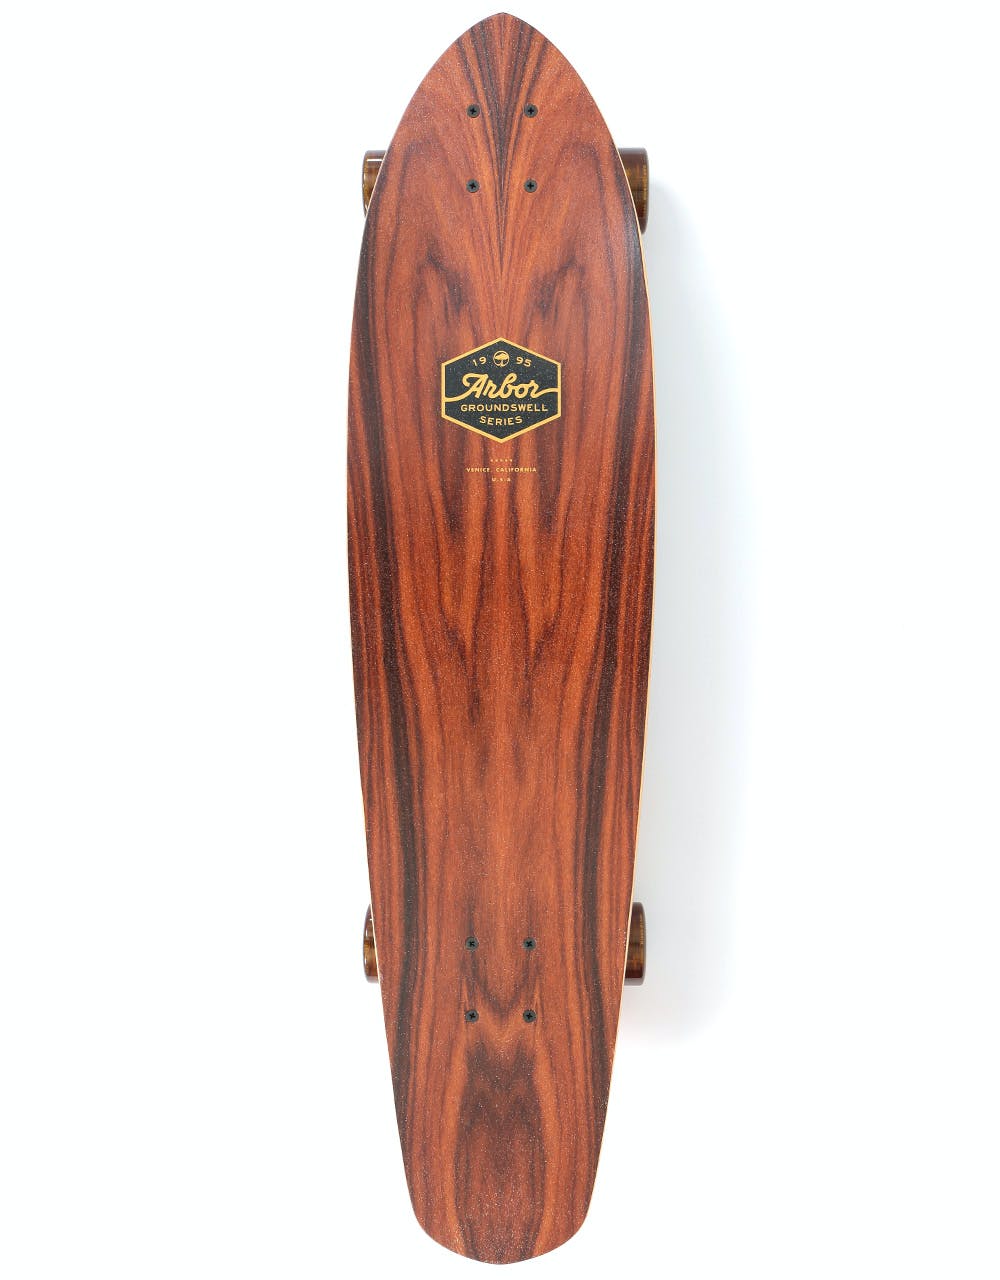 Arbor Mission Groundswell Longboard - 35" x 8.375"